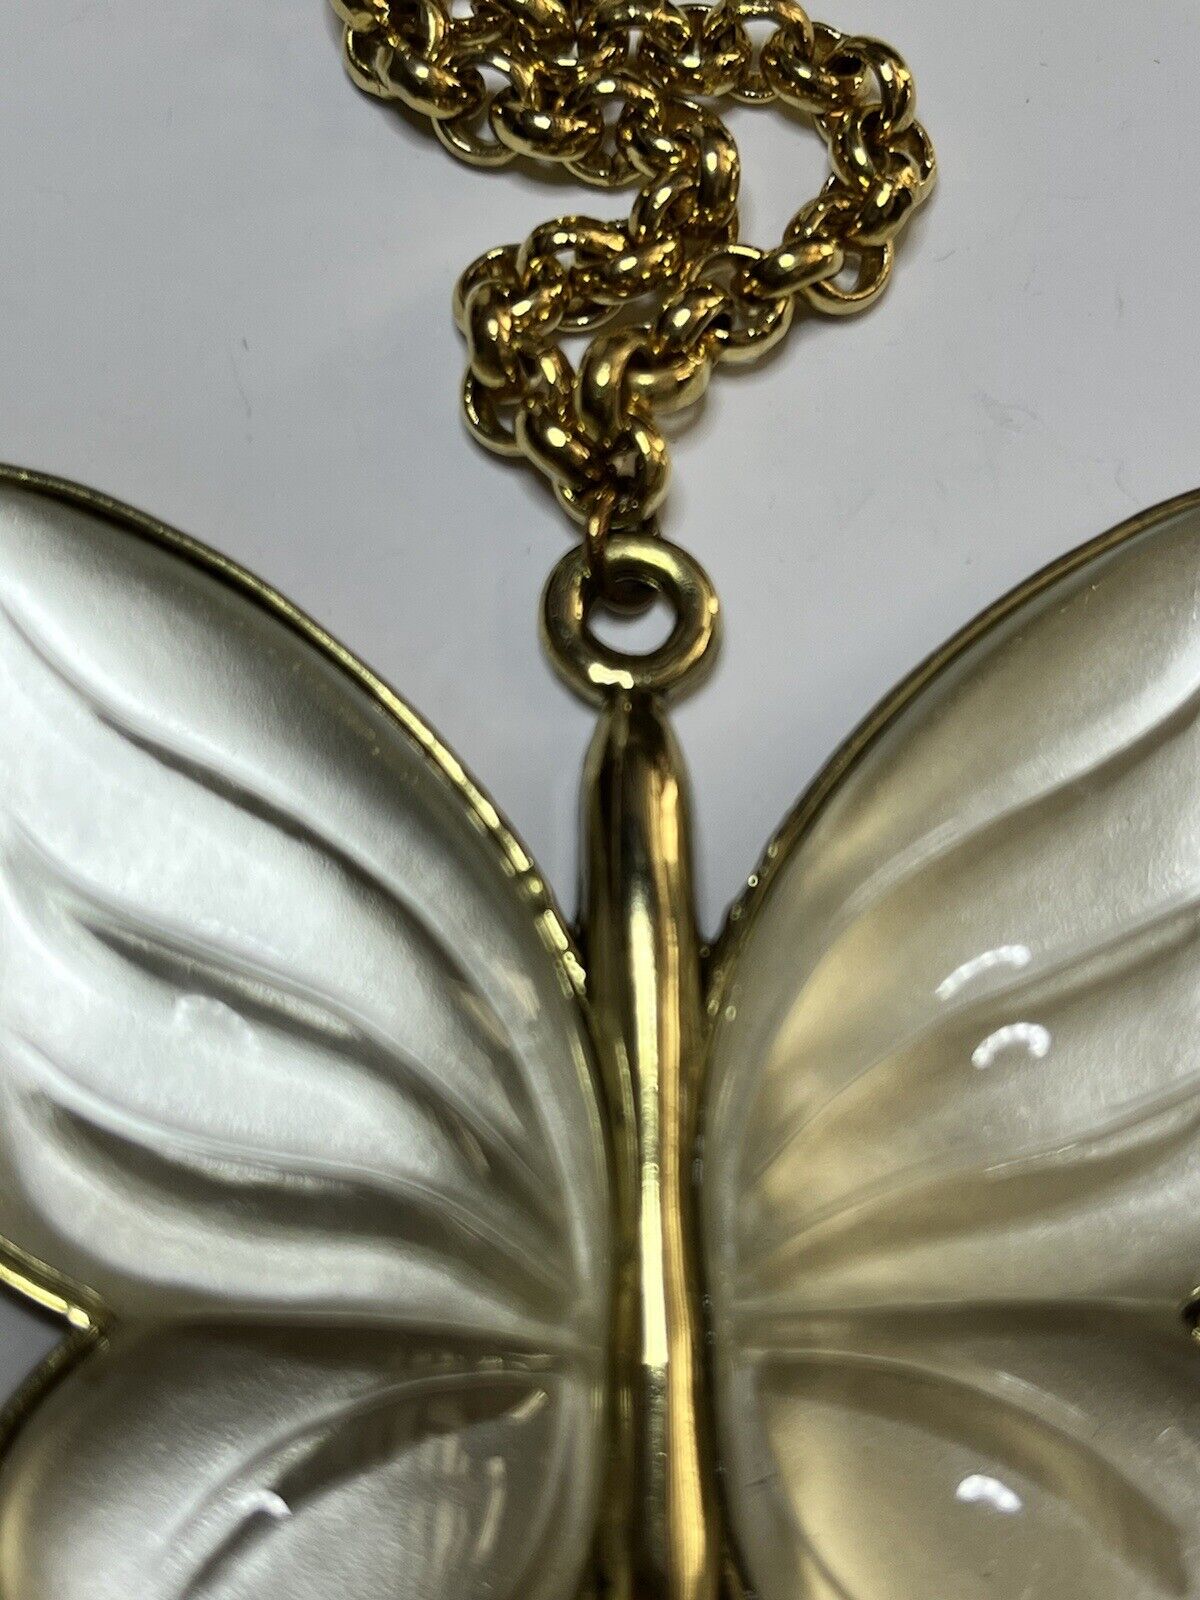 Vintage Gold Tone Pearlised Statement Butterfly Pendant Necklace